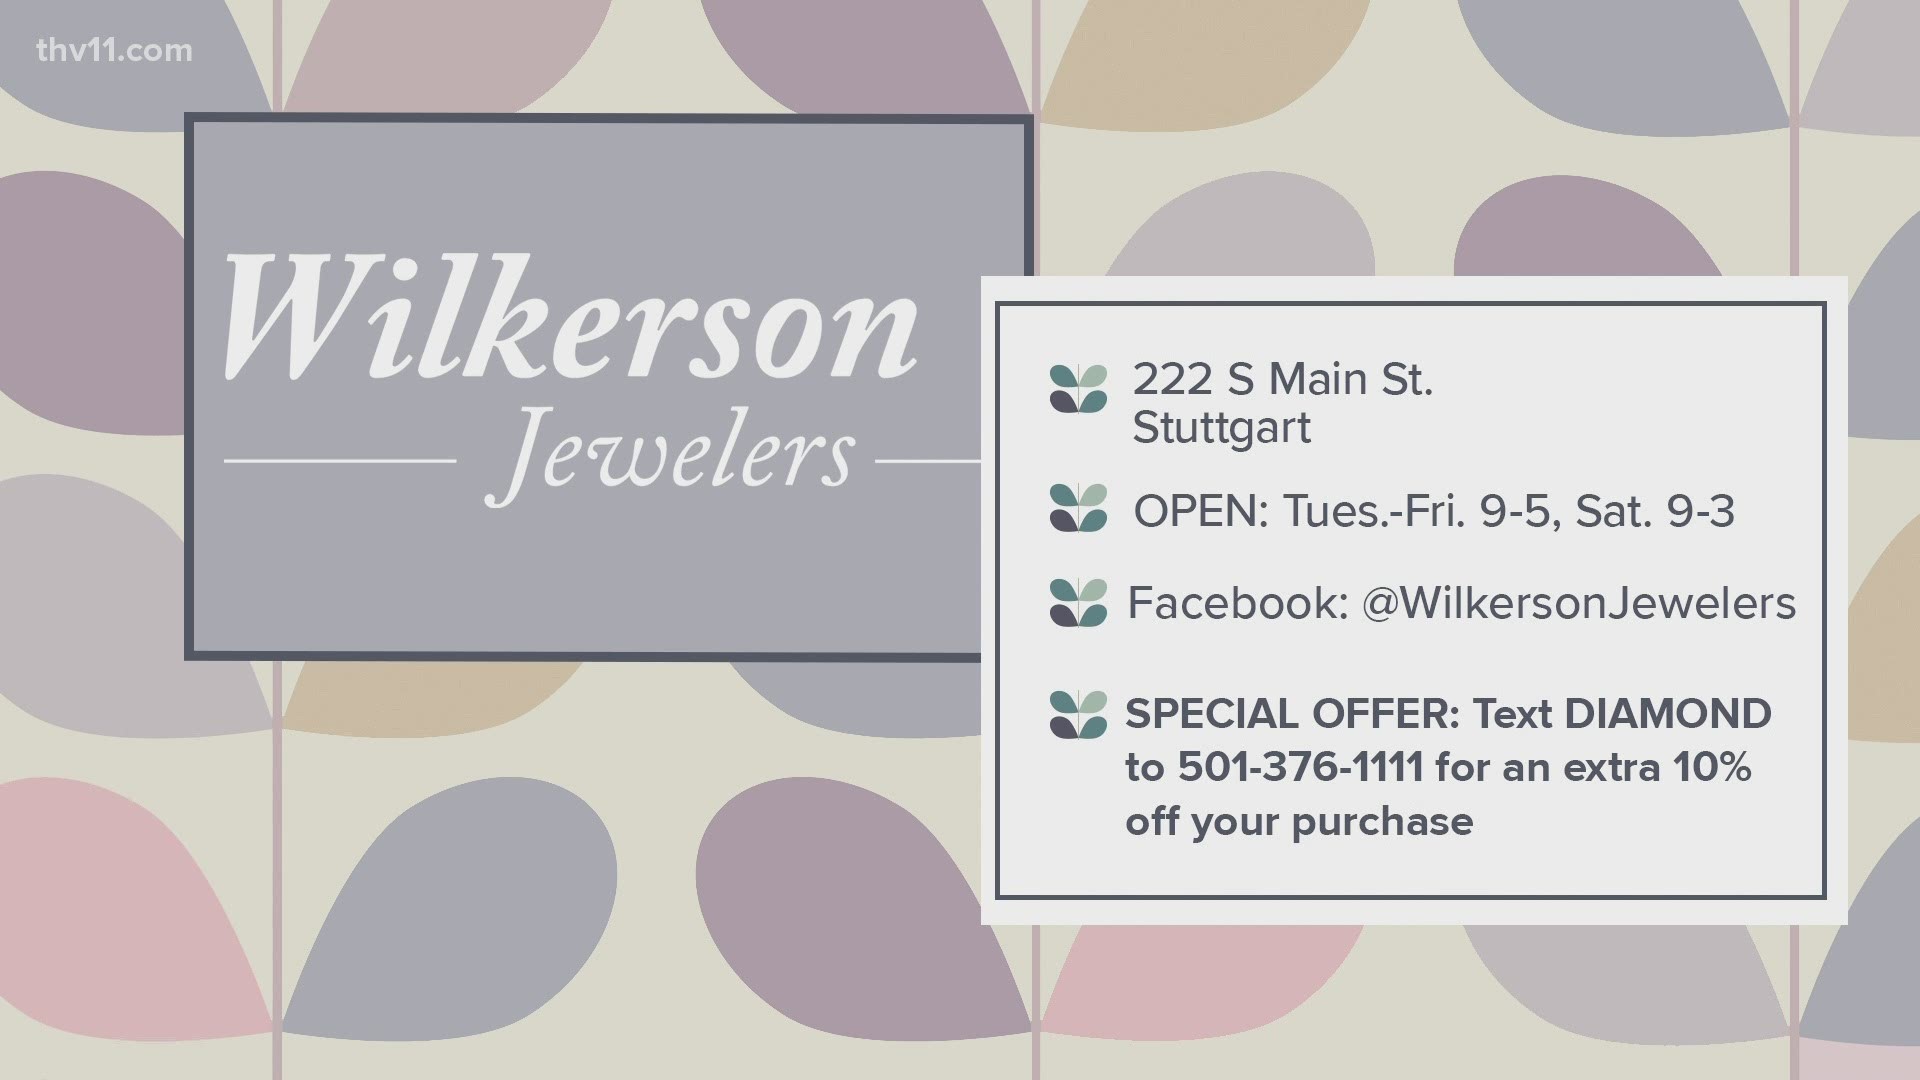 Wilkerson Jewelers prides itself on housing the most exceptional and diverse inventory in the state, with selections from all over the world.